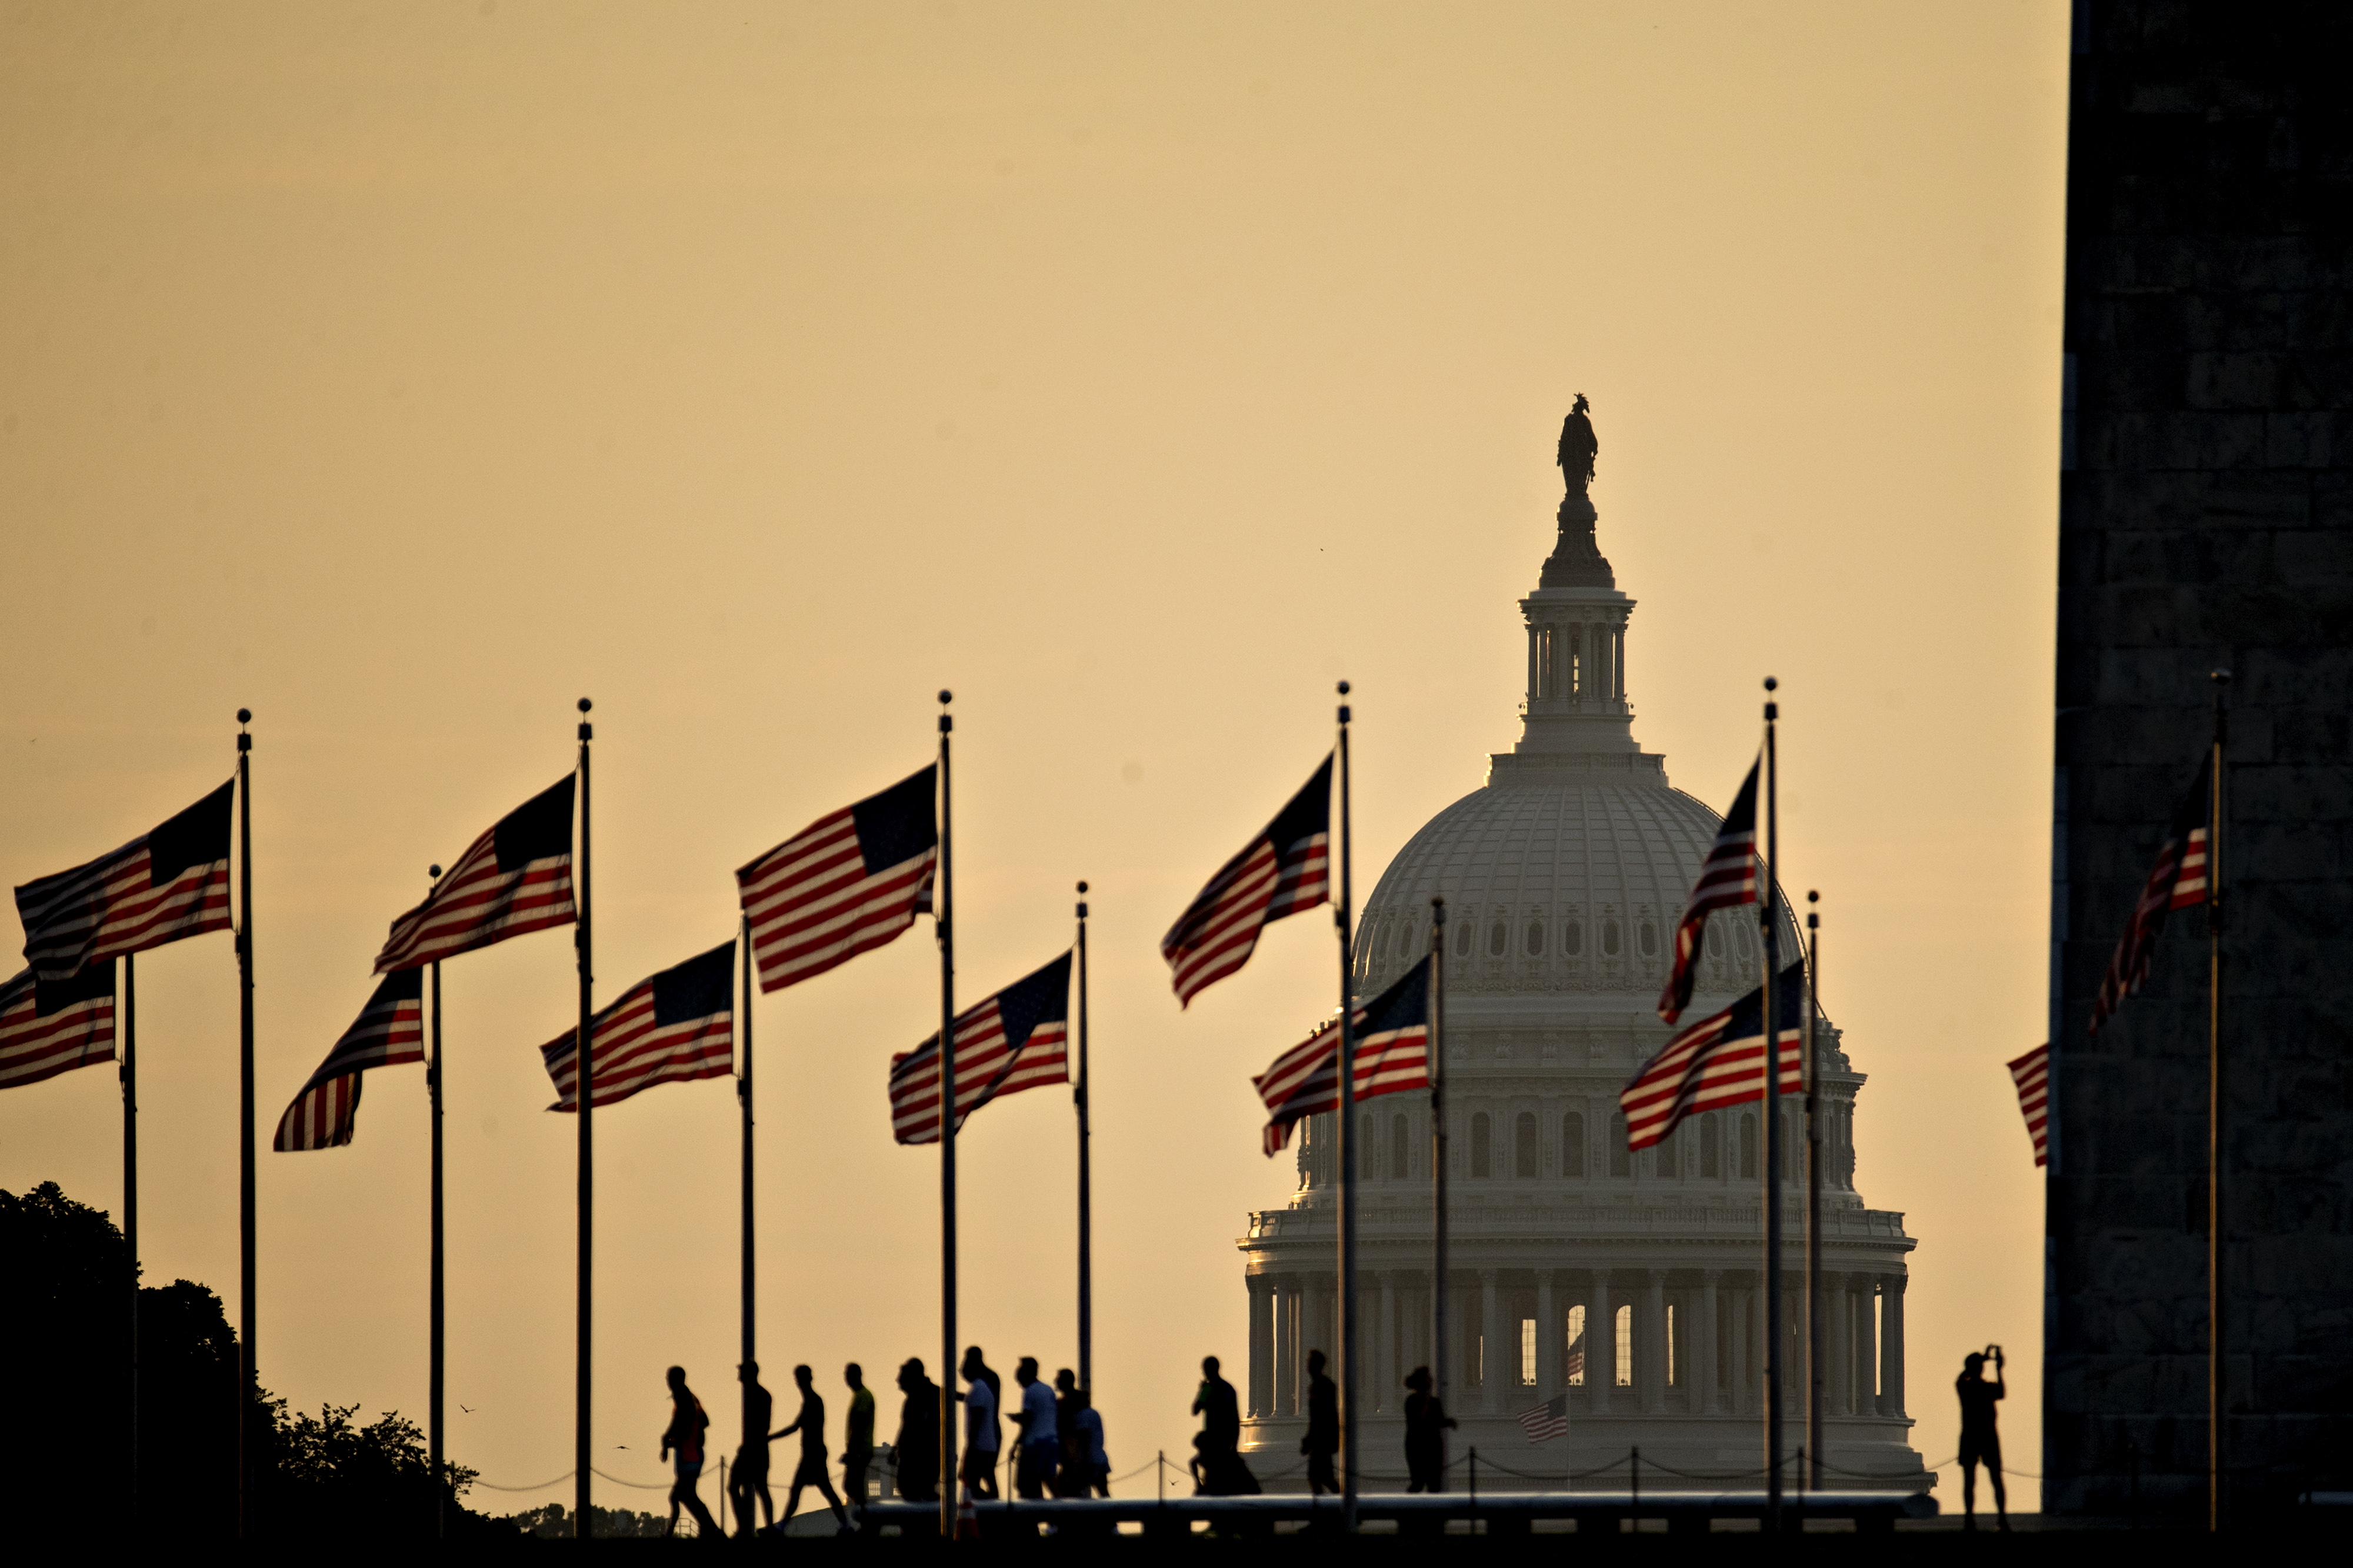 The U.S. Capitol building stands past visitors at the Washington Monument in Washington, D.C., U.S., on Tuesday, July 11, 2017. (Andrew Harrer—Bloomberg via Getty Images)